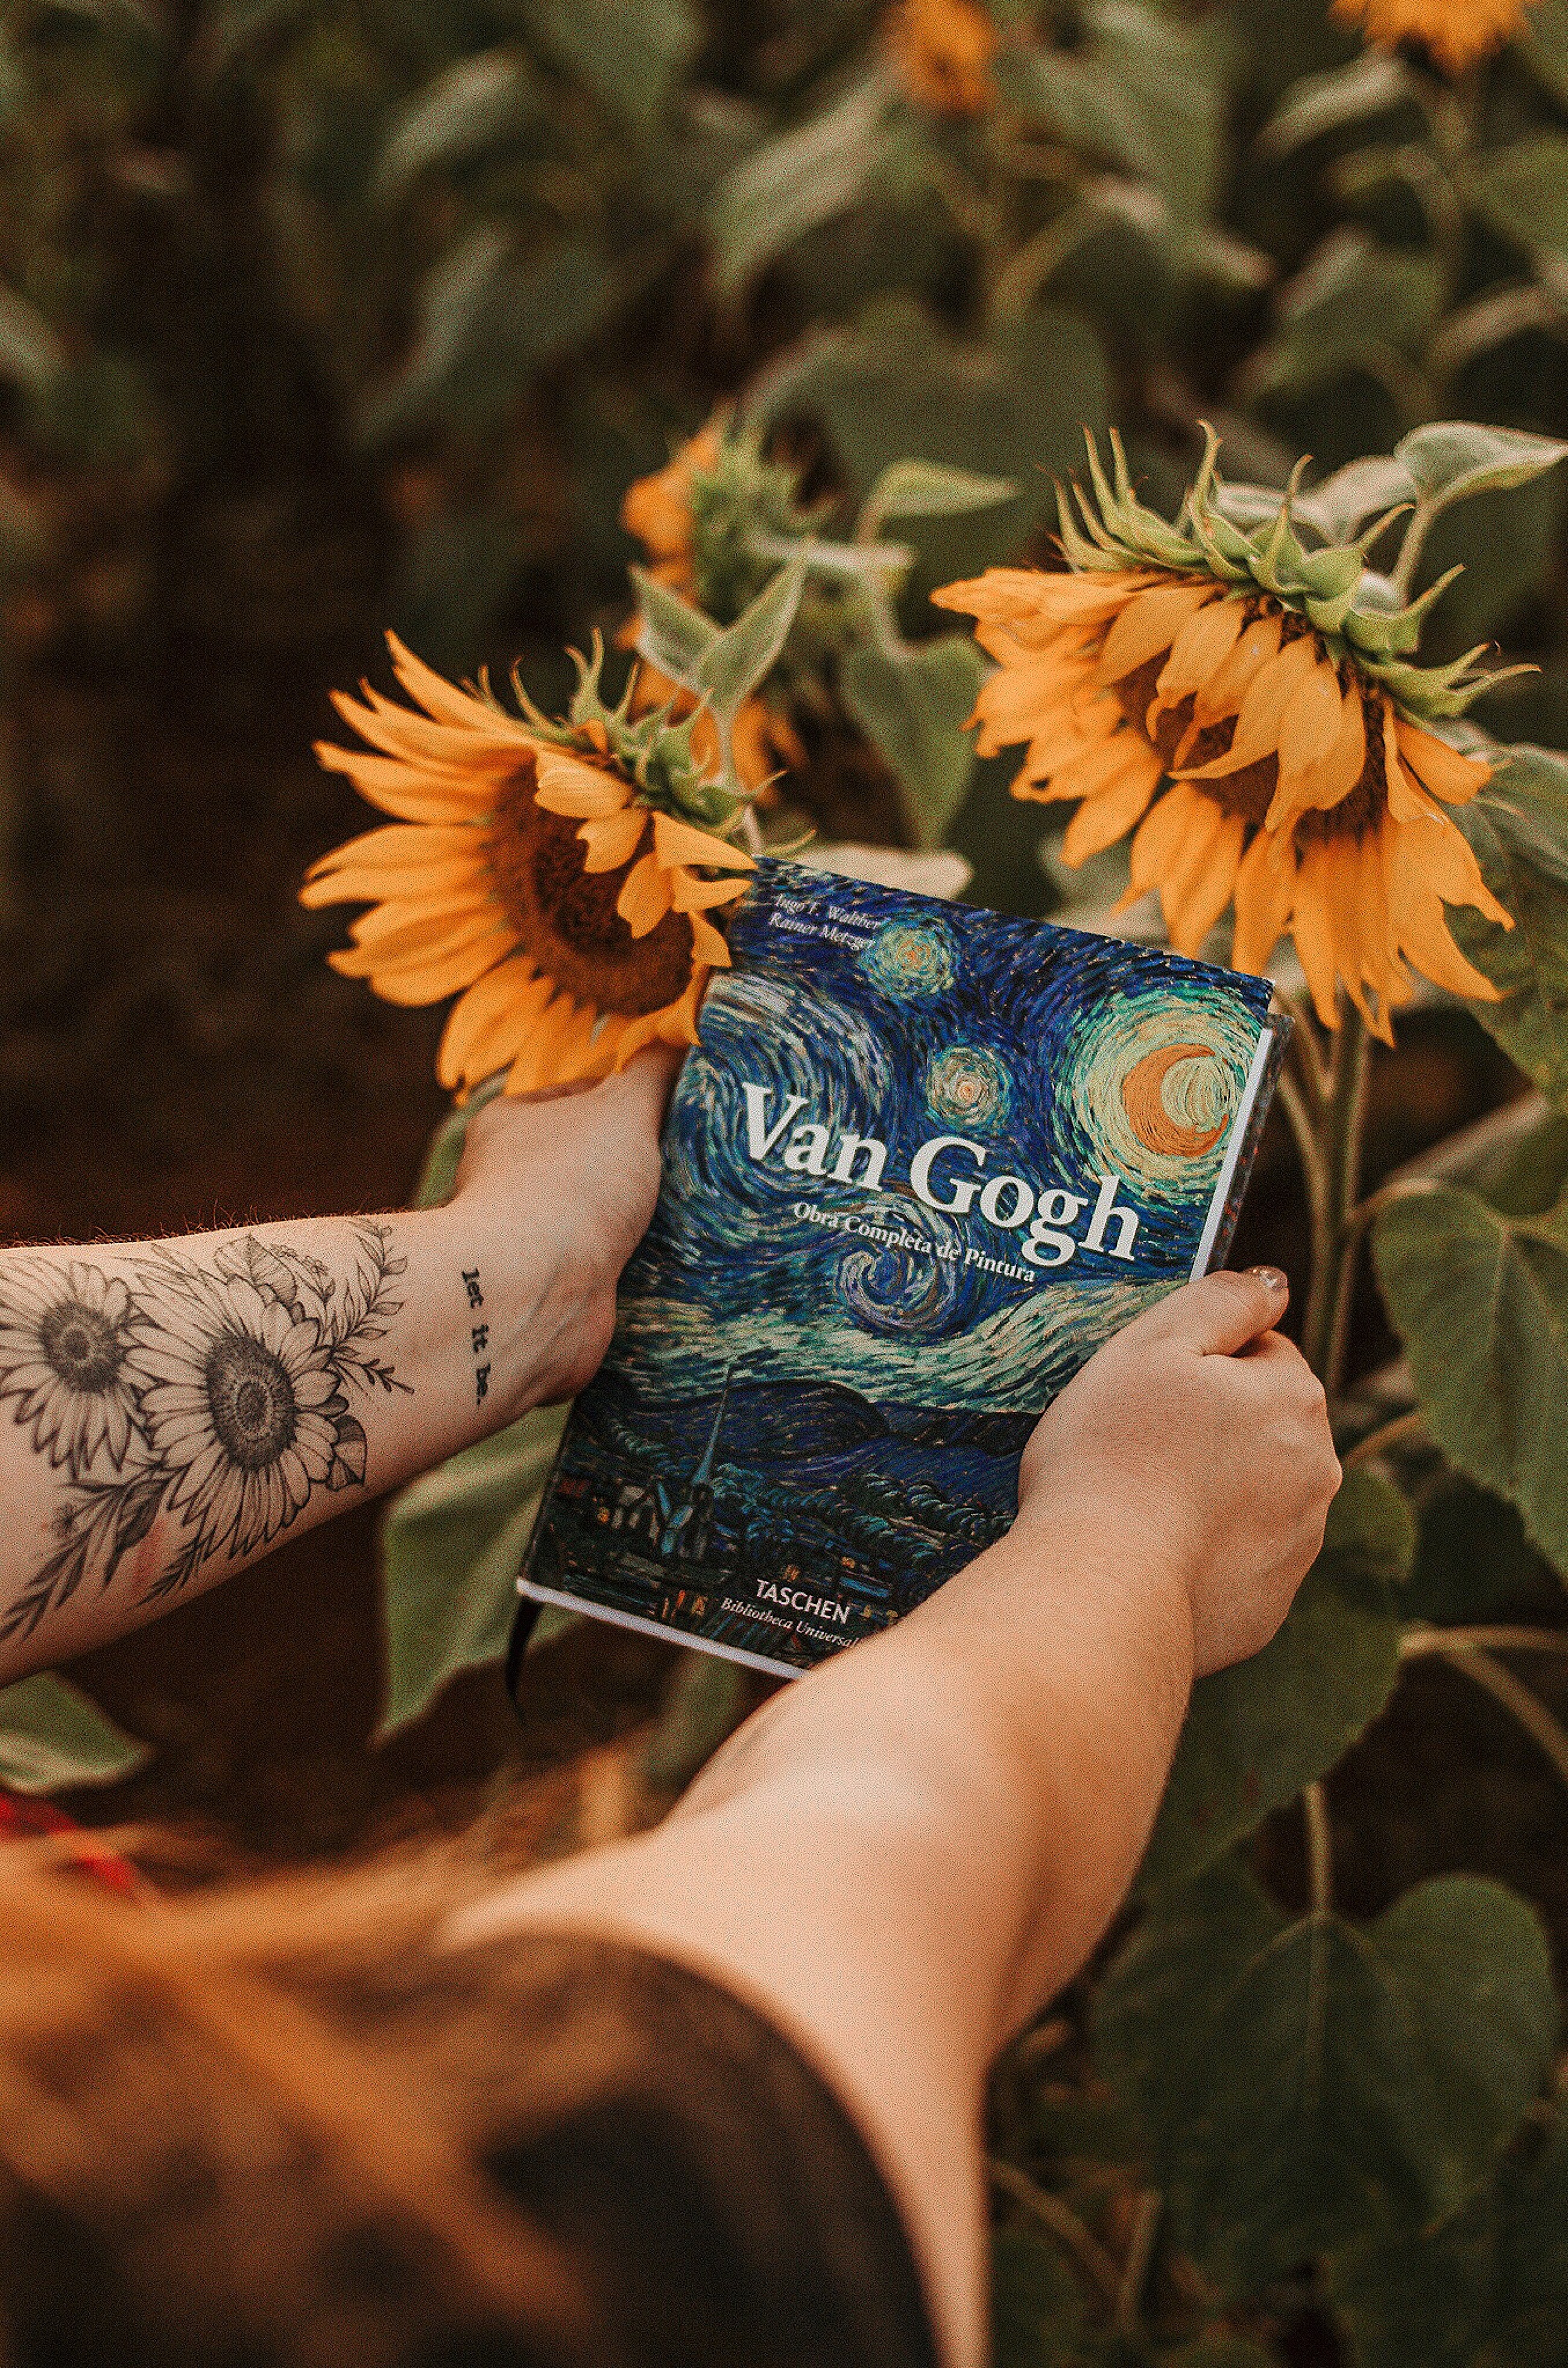 A person holding a Van Gogh book beside sunflowers